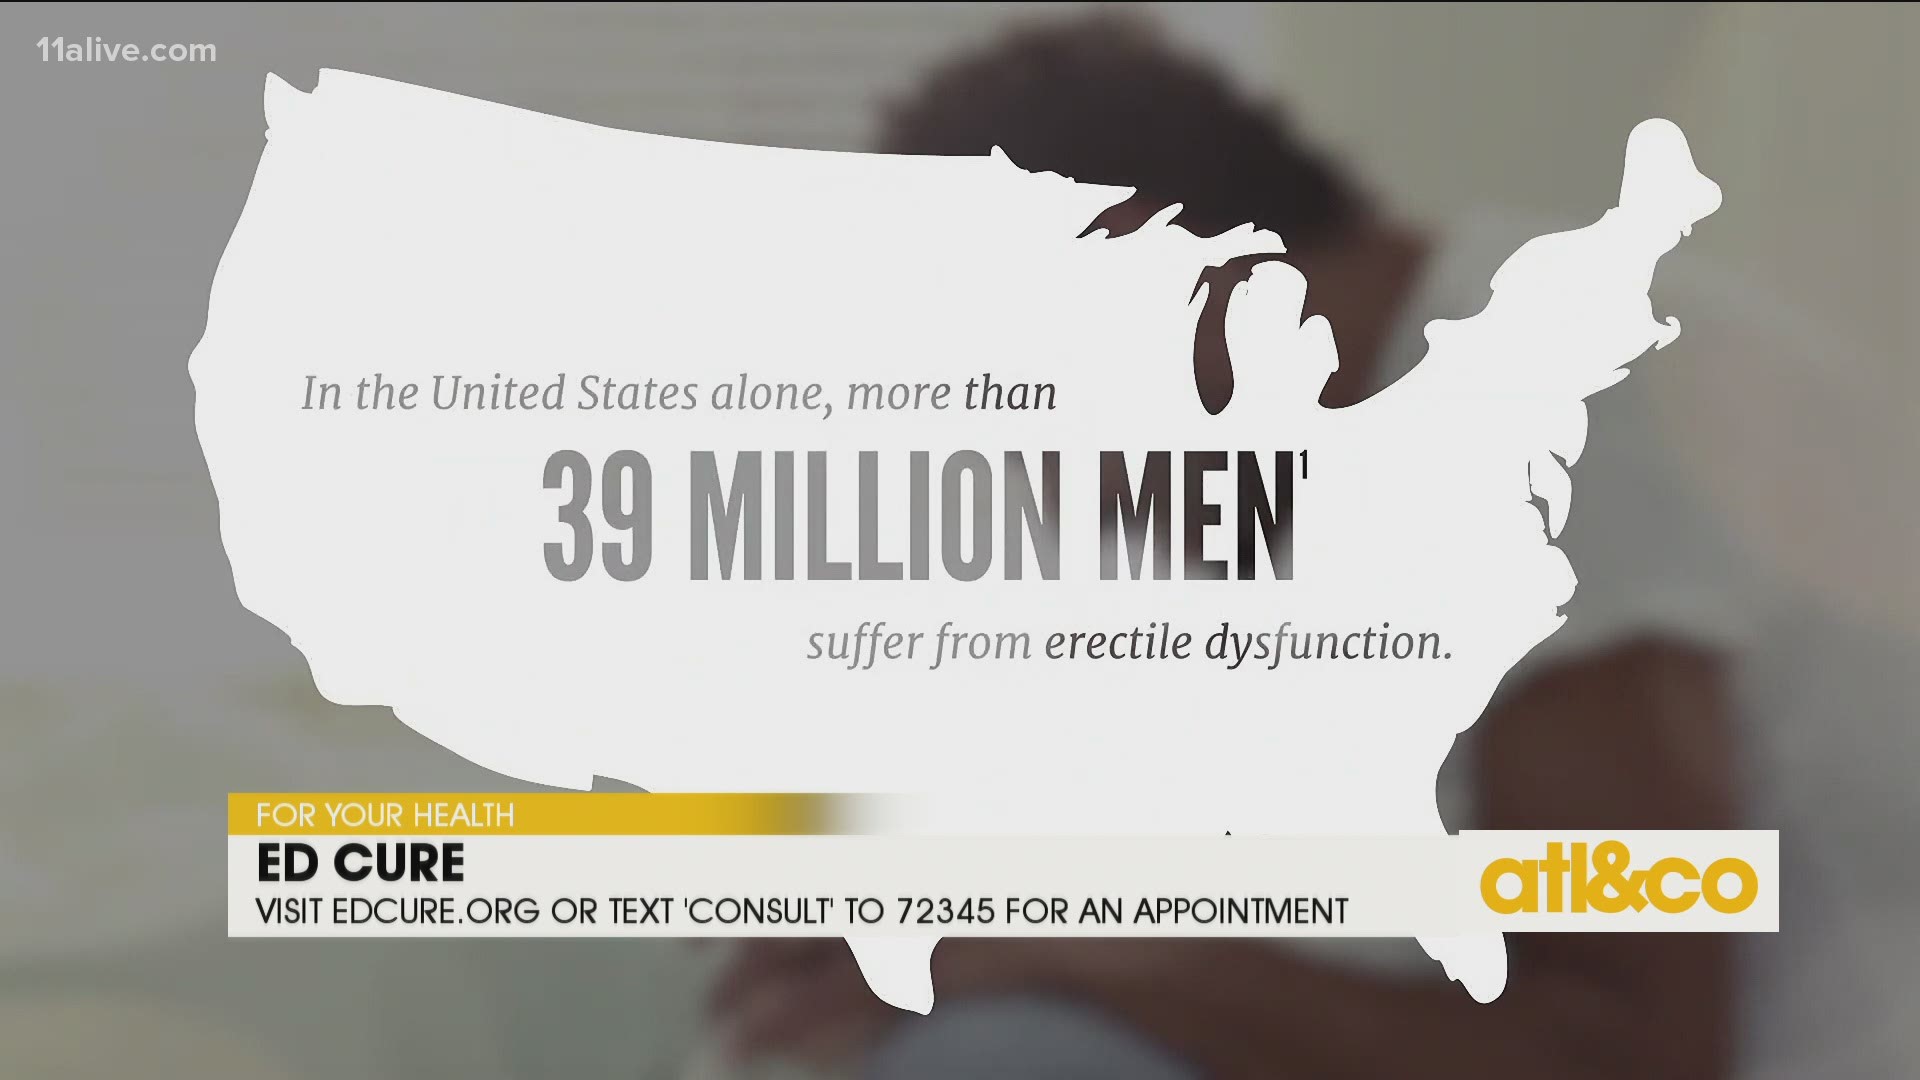 More than 39 million men in the U.S. suffer from erectile dysfunction. Dr. Kapadia of WellStar Urology shares FDA-approved treatments that can help.